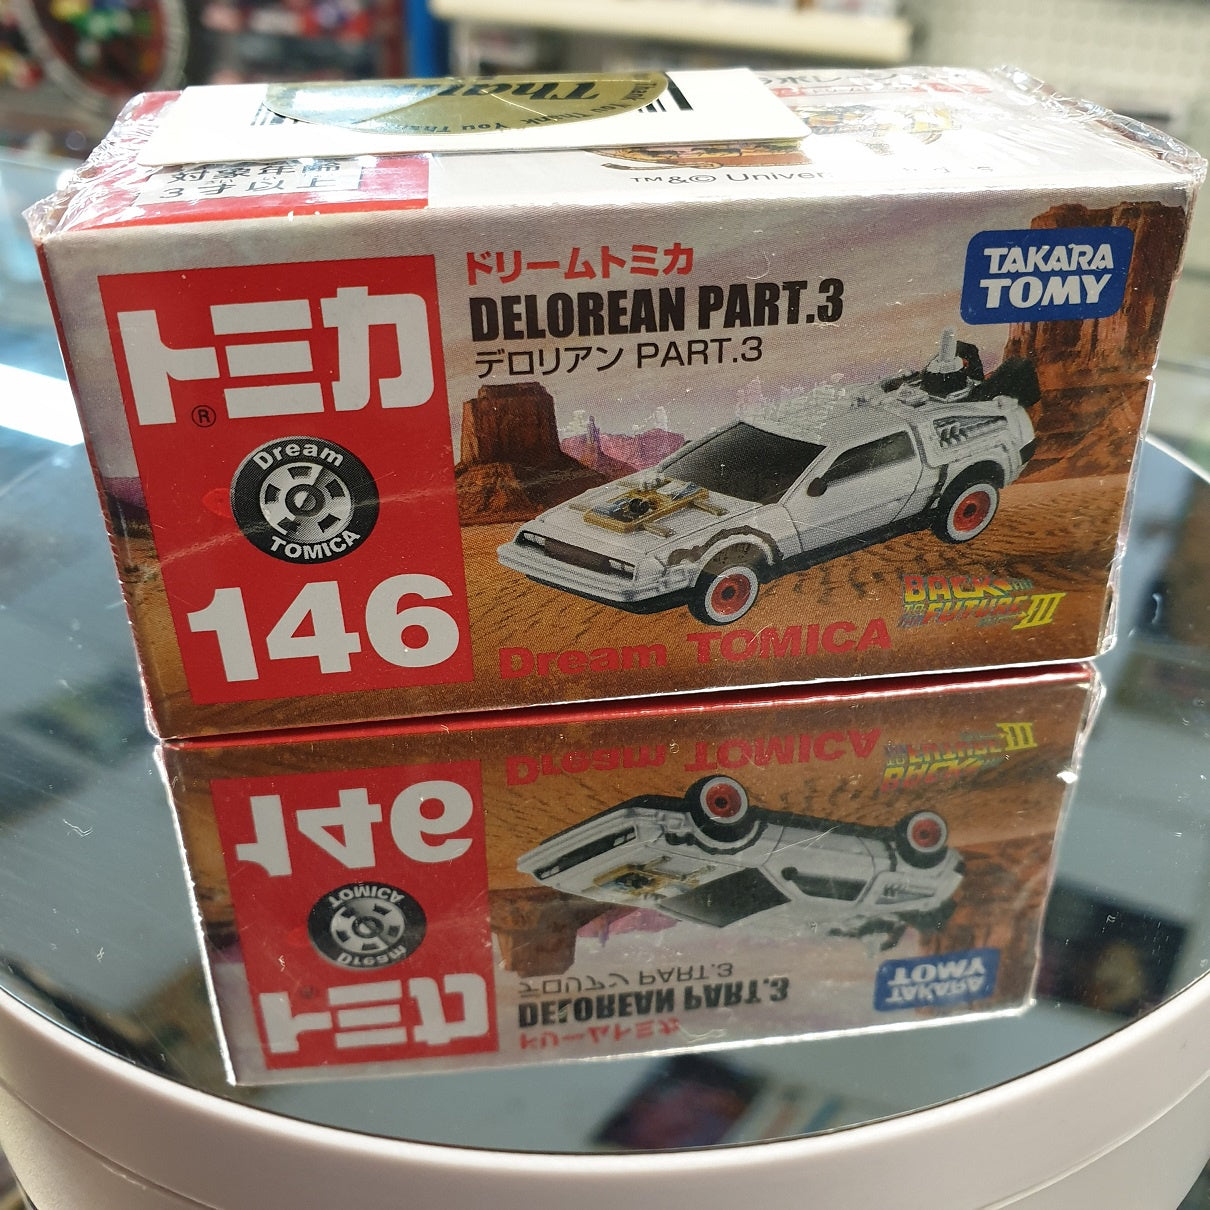 Takara Tomy Tomica - Delorean Back To The Future Part 3 Diecast Car #146